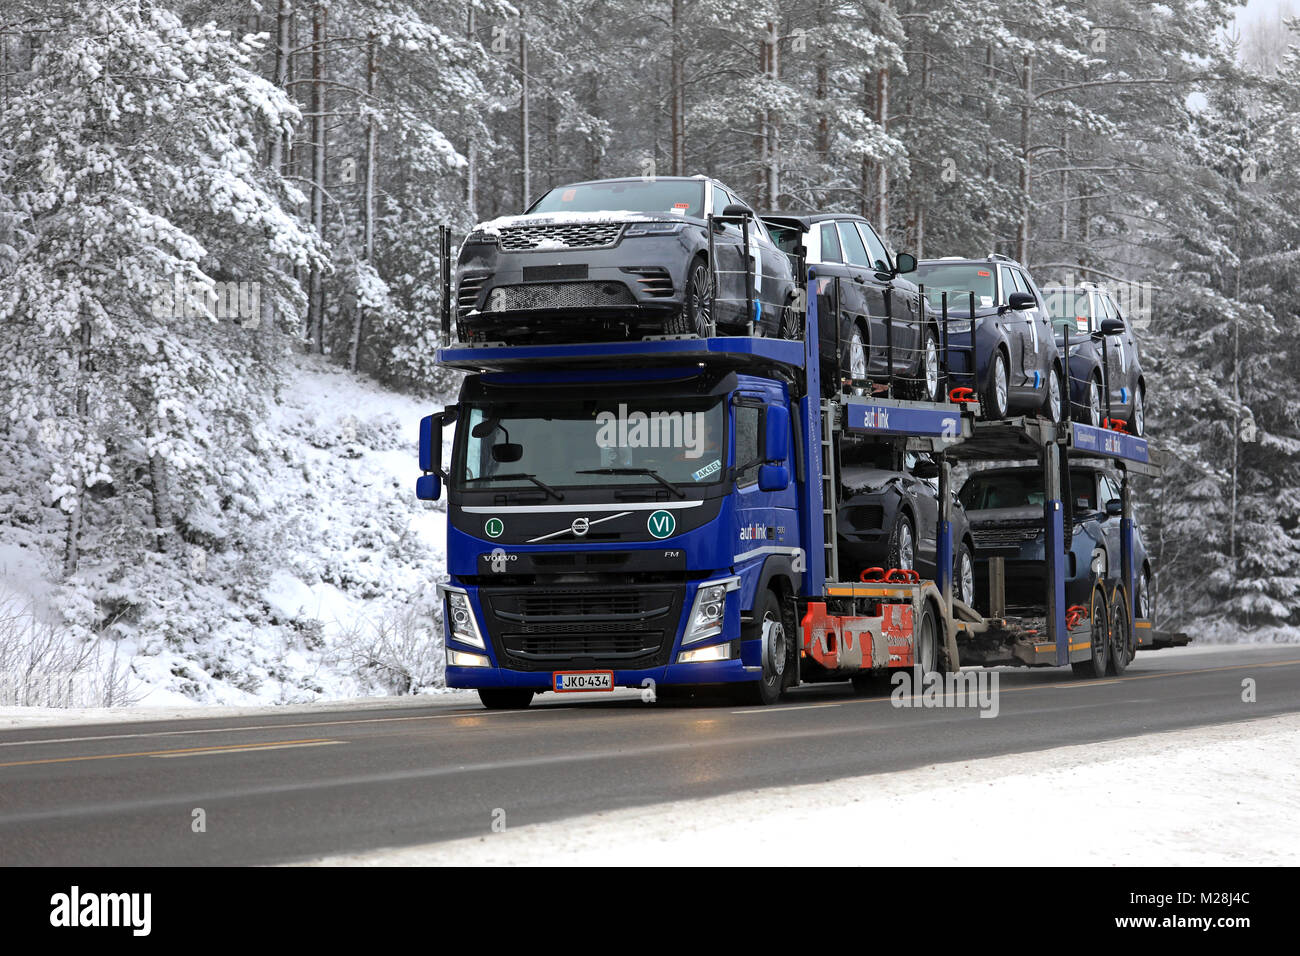 SALO, FINLAND - JANUARY 20, 2018: Volvo FM car carrier truck of Autolink transports new Range Rover cars along rural highway in winter. Stock Photo